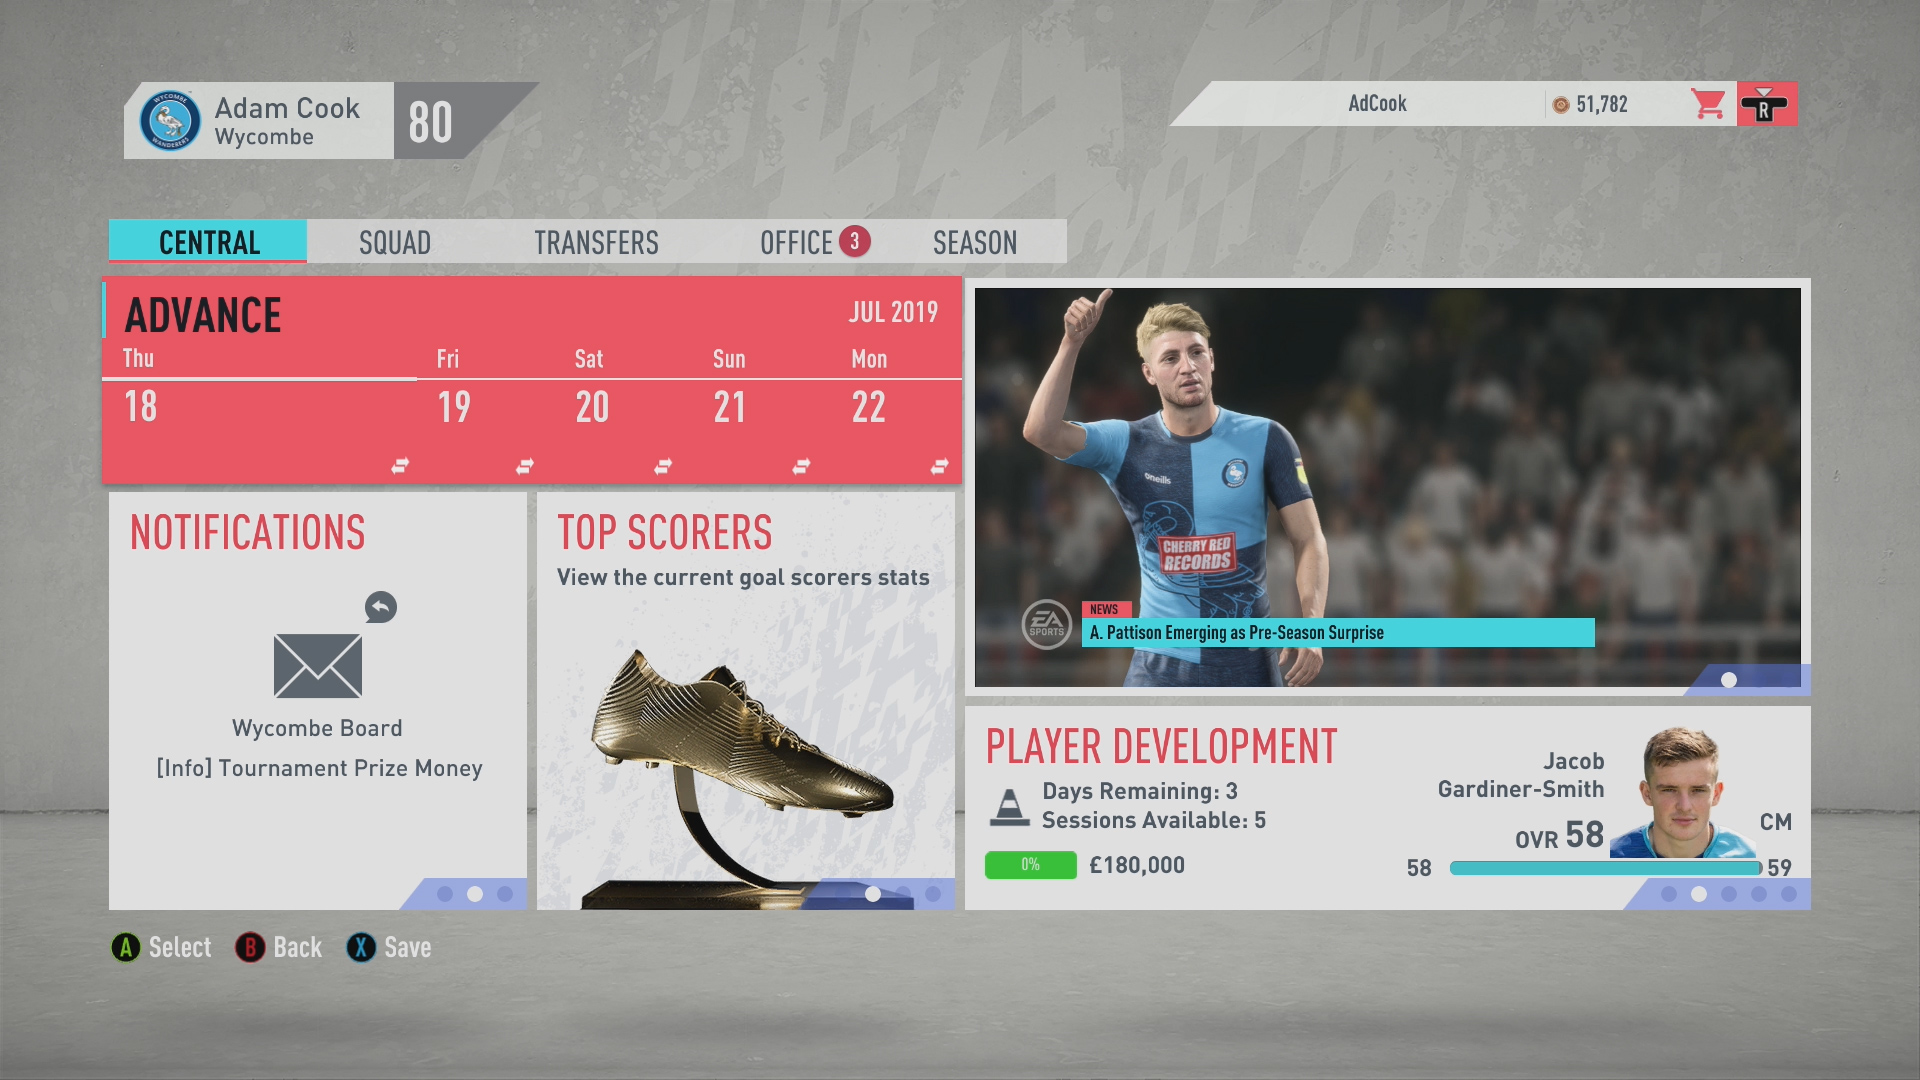 Career Mode remains mostly untouched